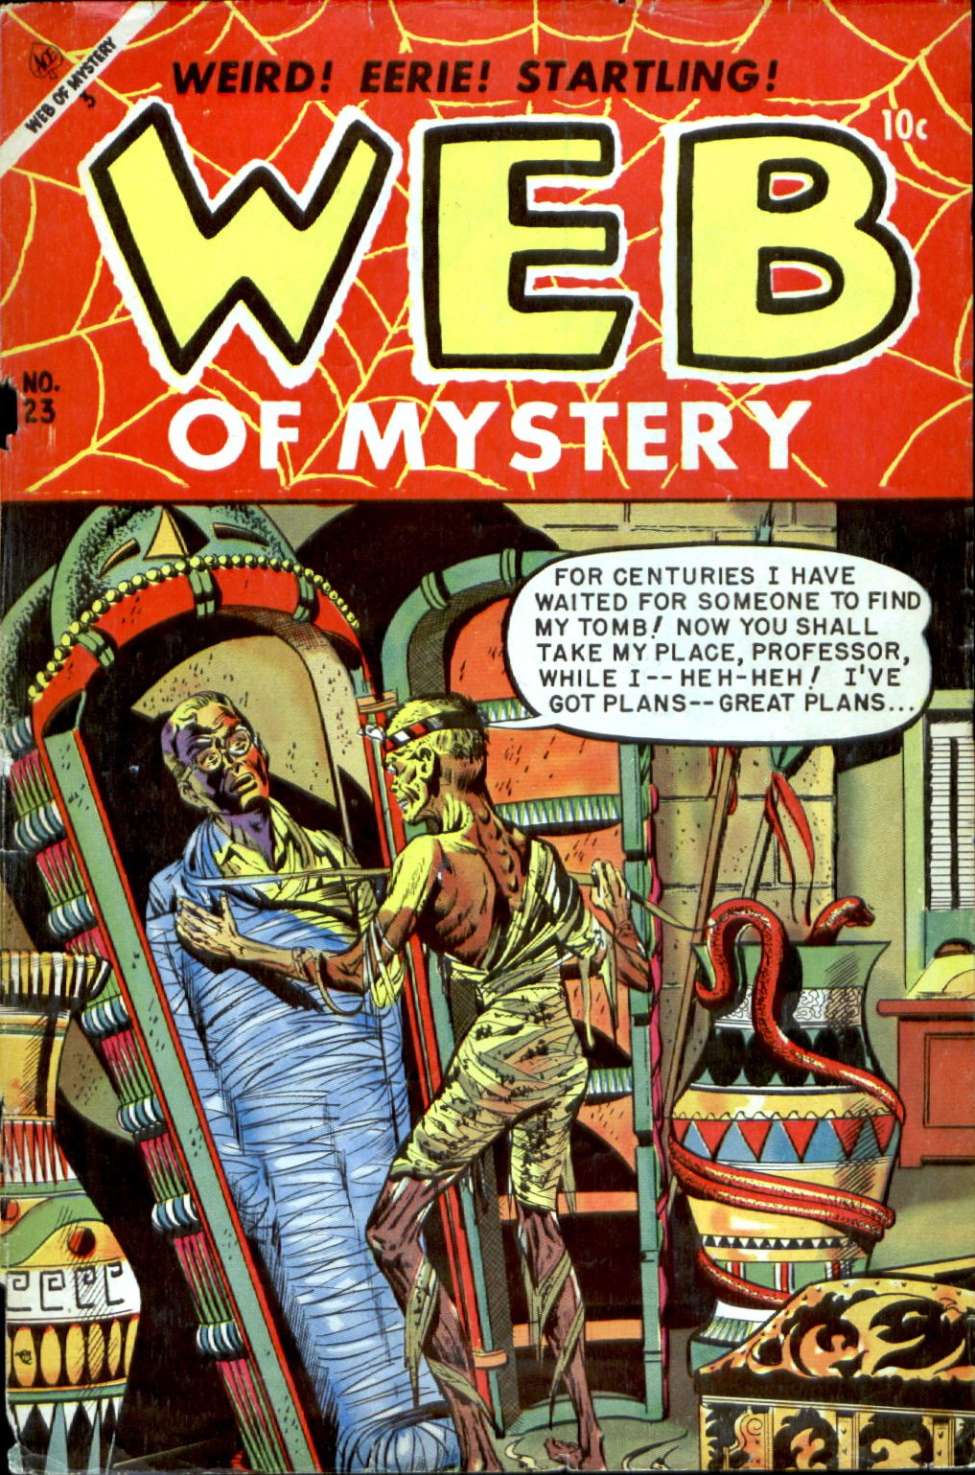 Comic Book Cover For Web of Mystery 23